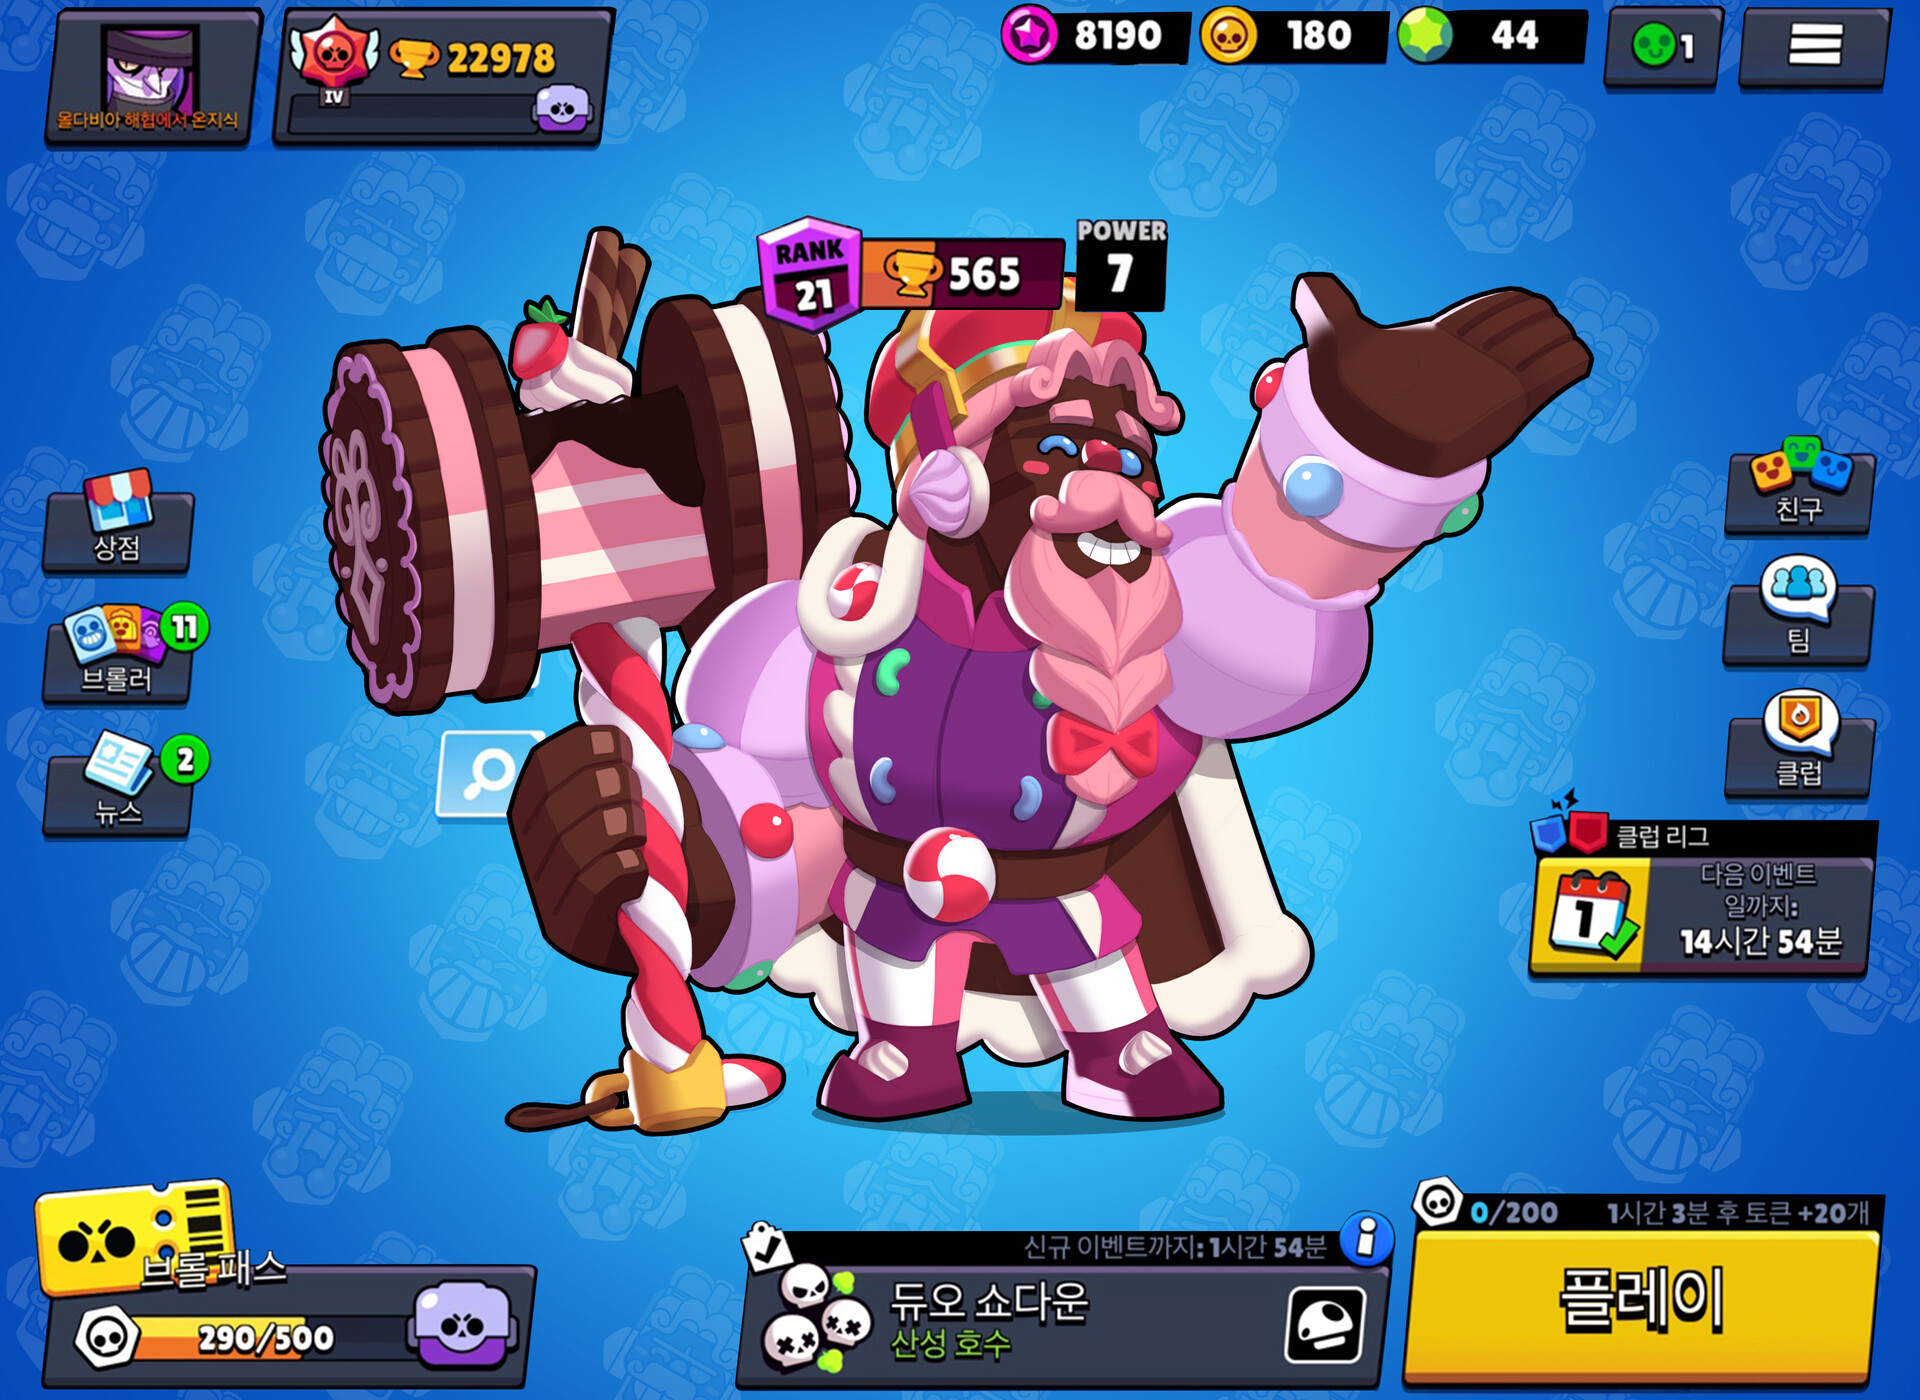 Sweet Lord Frank Brawlstars Supercell Make, Chanyoung Cho.